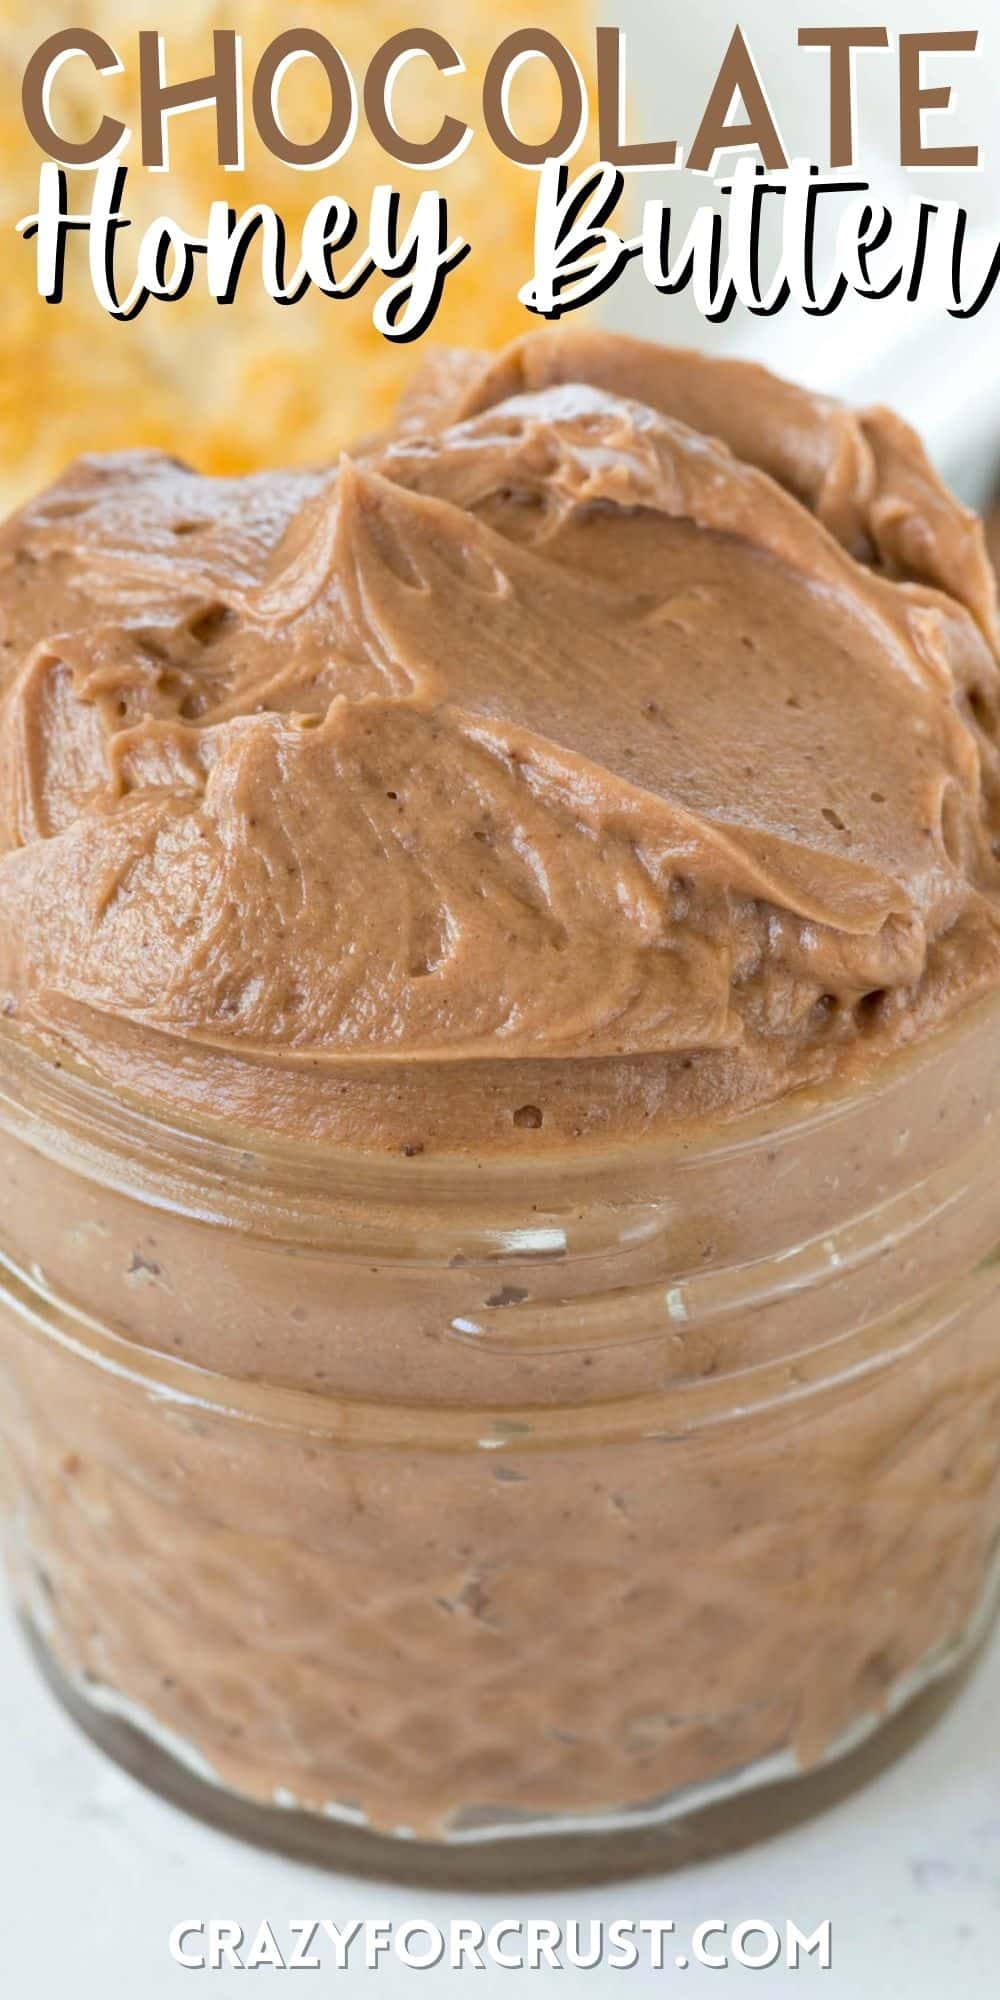 chocolate honey butter in a clear small jar with words on the image.